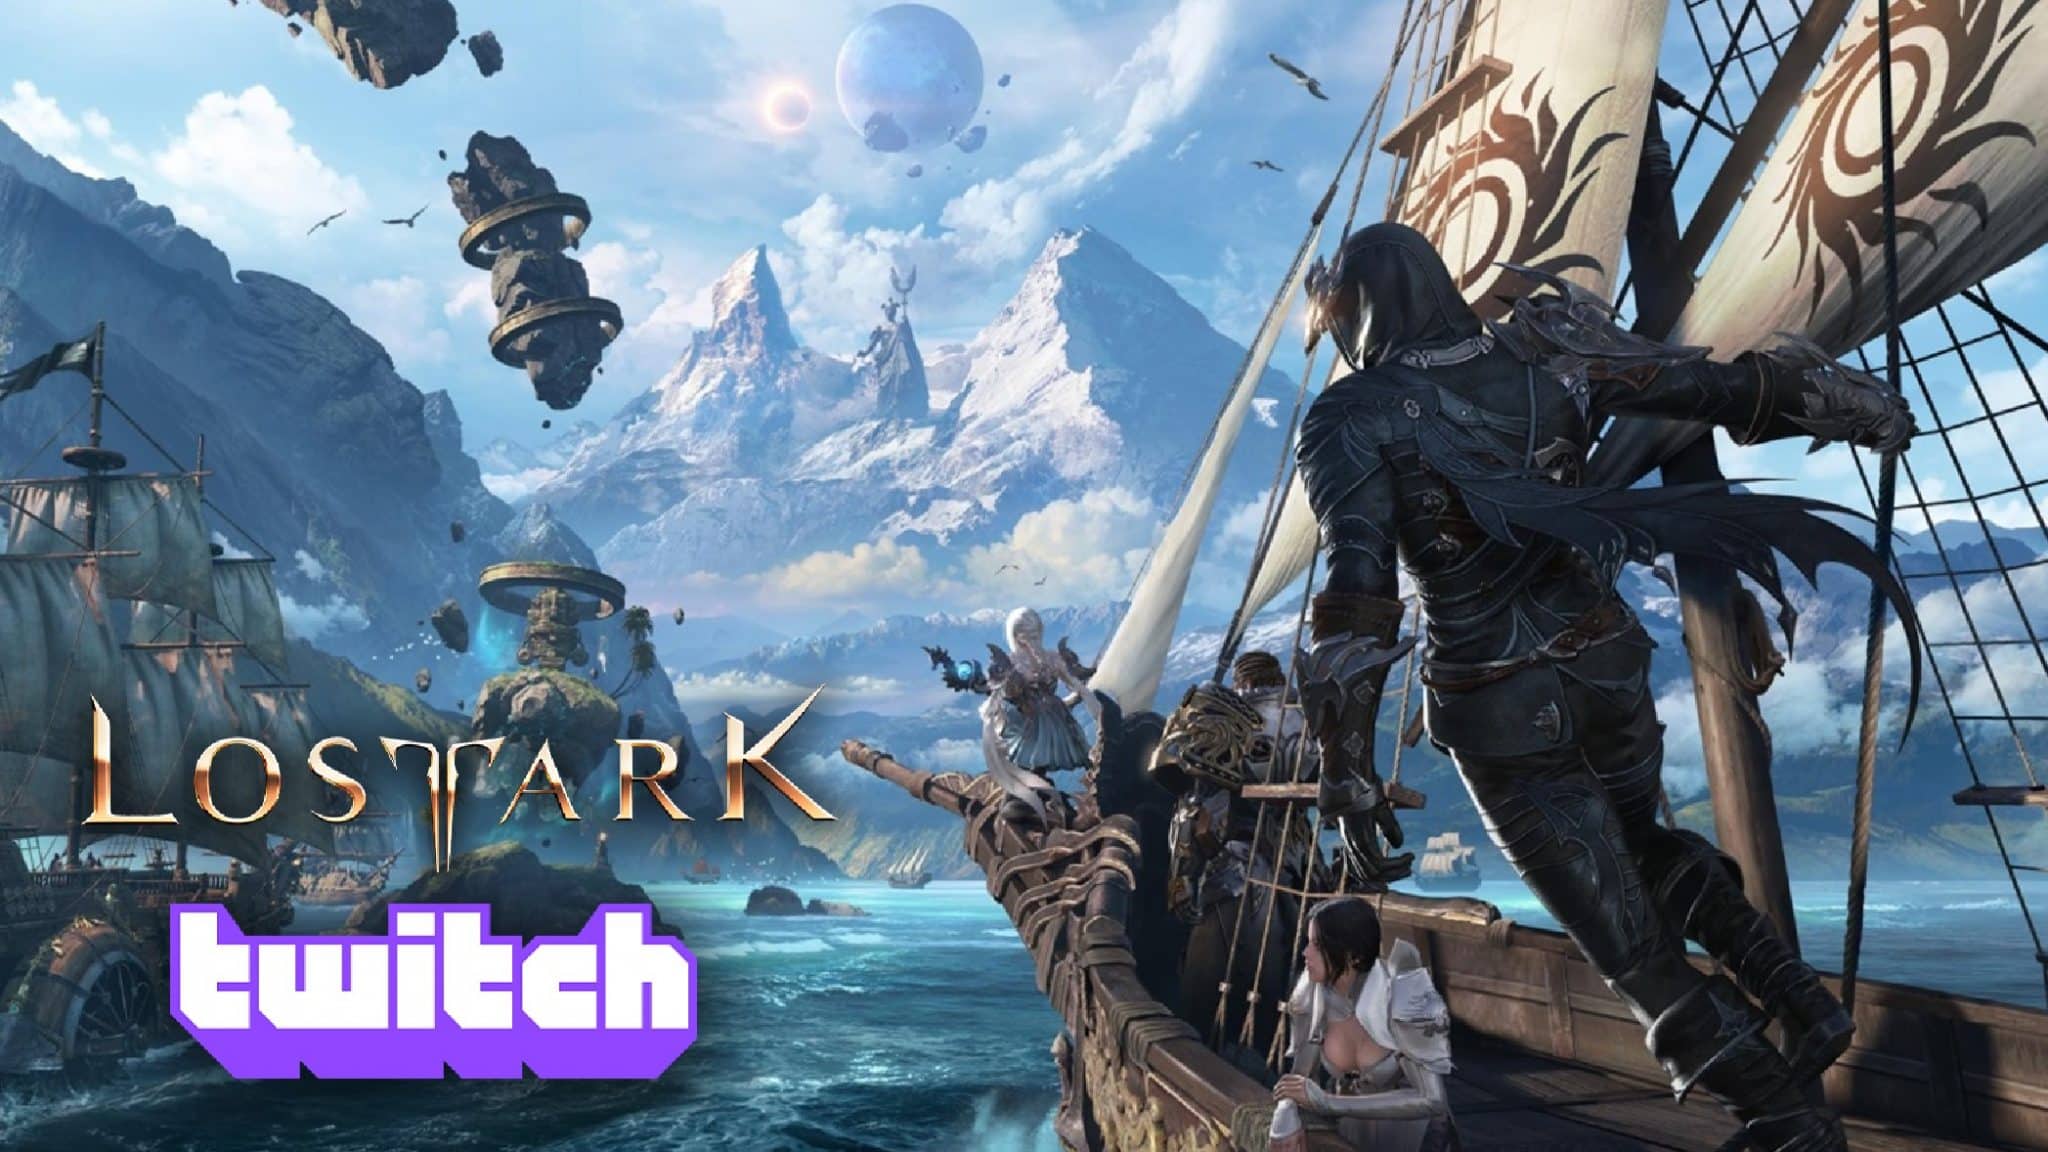 September Twitch Roundup - News  Lost Ark - Free to Play MMO Action RPG